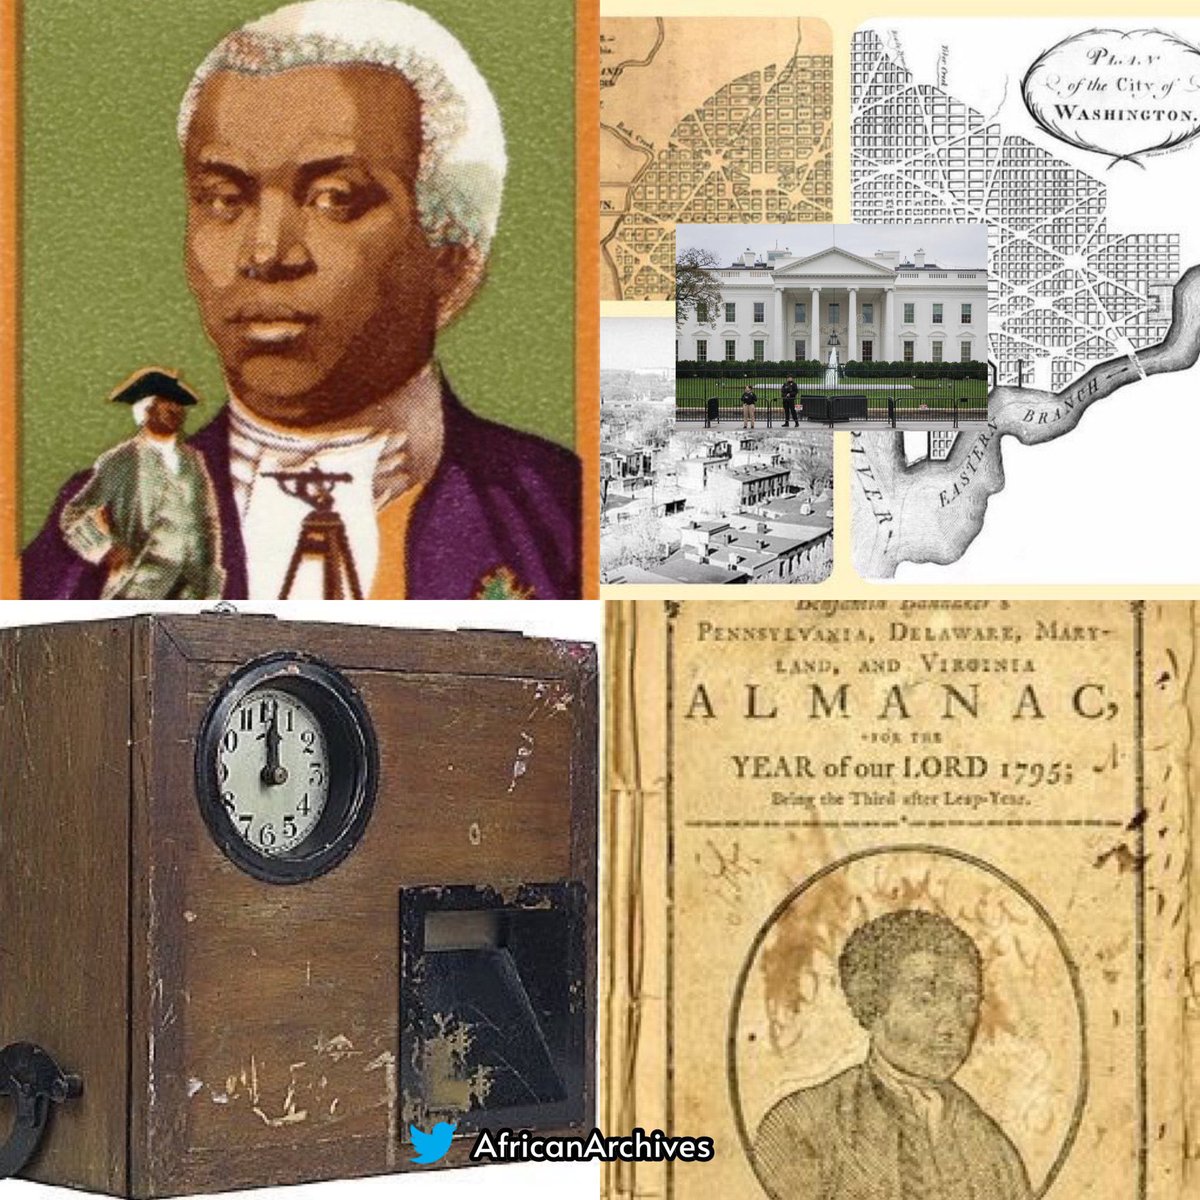 On this day in 1806, Benjamin Banneker died. In 1753, he created the first functioning clock in the U.S entirely out of wood, it was so advanced it kept accurate time for over 50 years. During his funeral, all his belongings including the clock were destroyed in a mysterious…